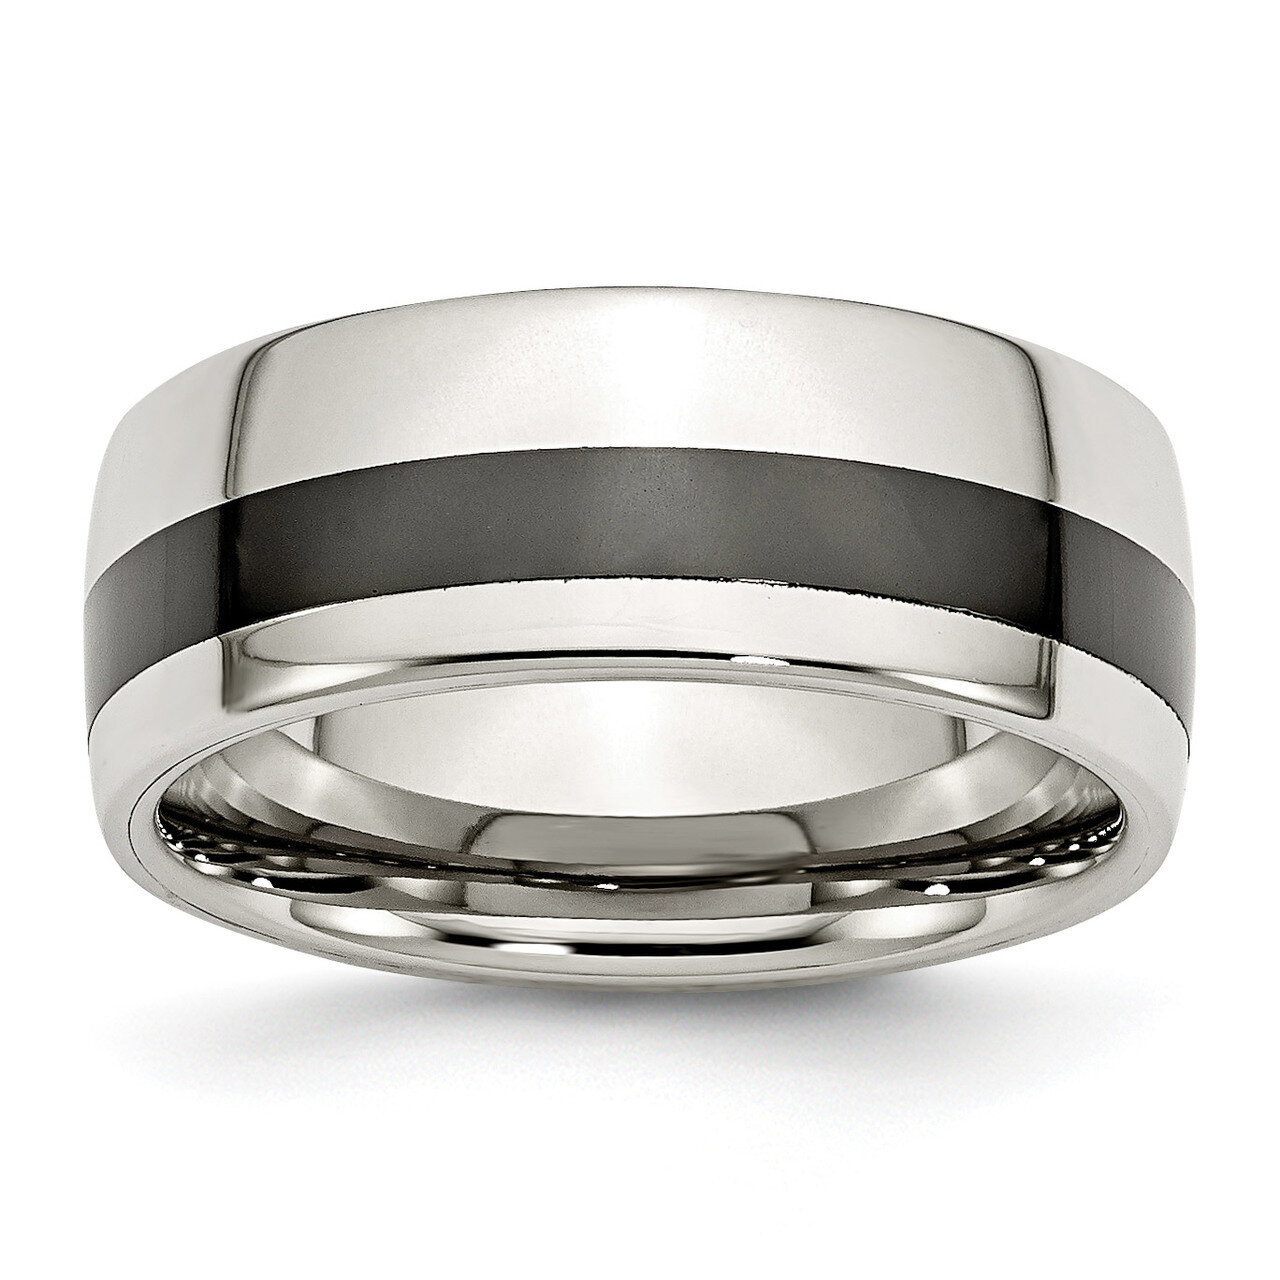 Polished Black Ceramic Inlay 9.00mm Band Stainless Steel SR389-10